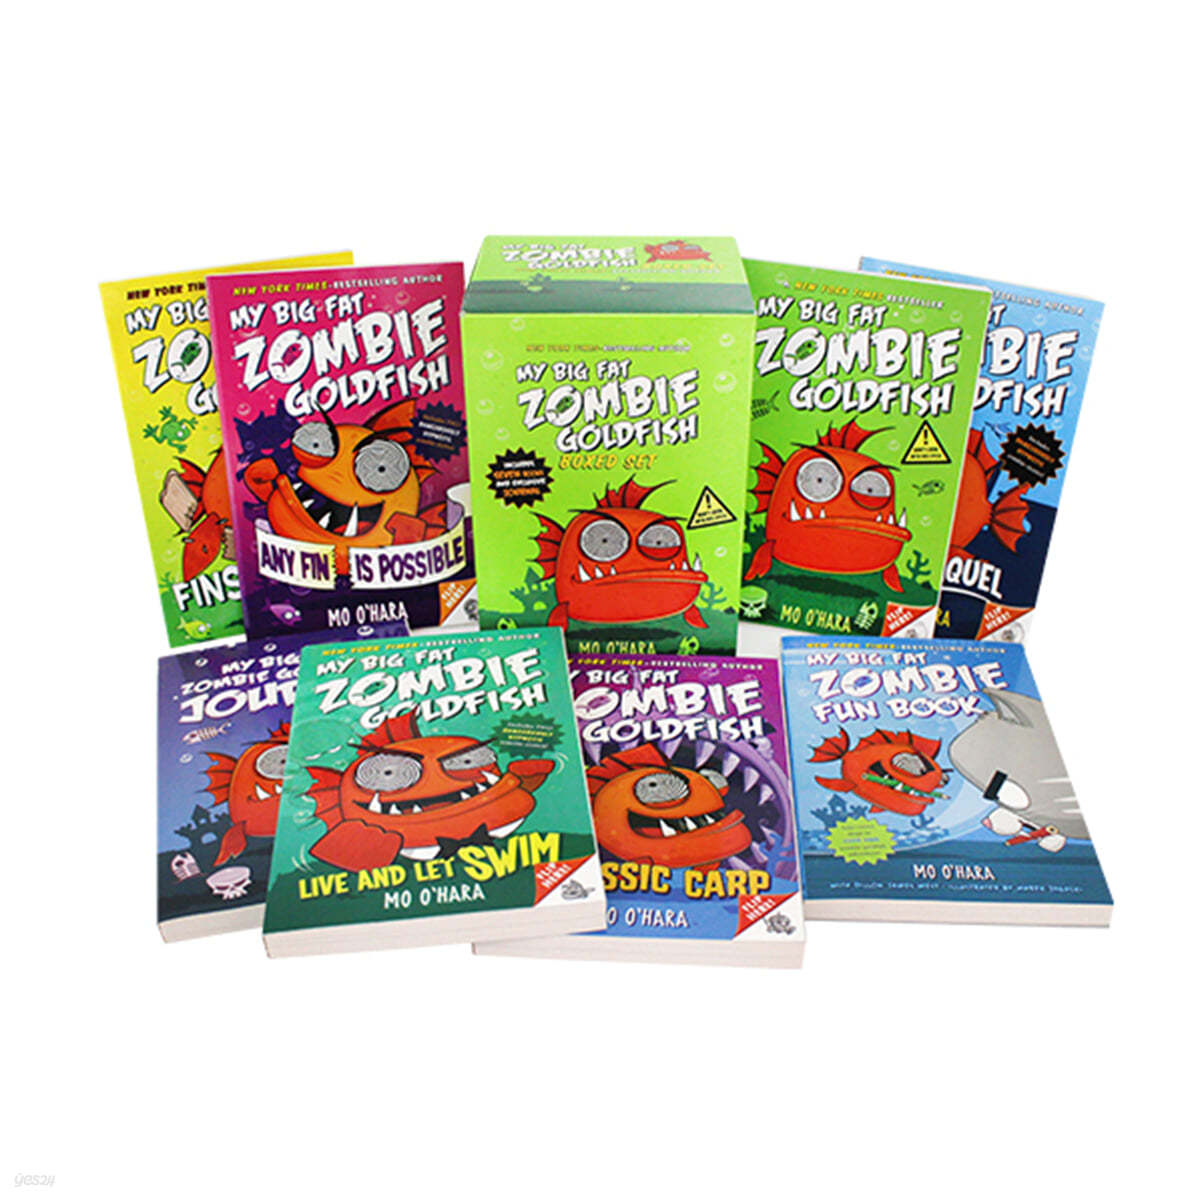 My Big Fat Zombie Goldfish Boxed Set (Includes 7 Books and Exclusive Journal)